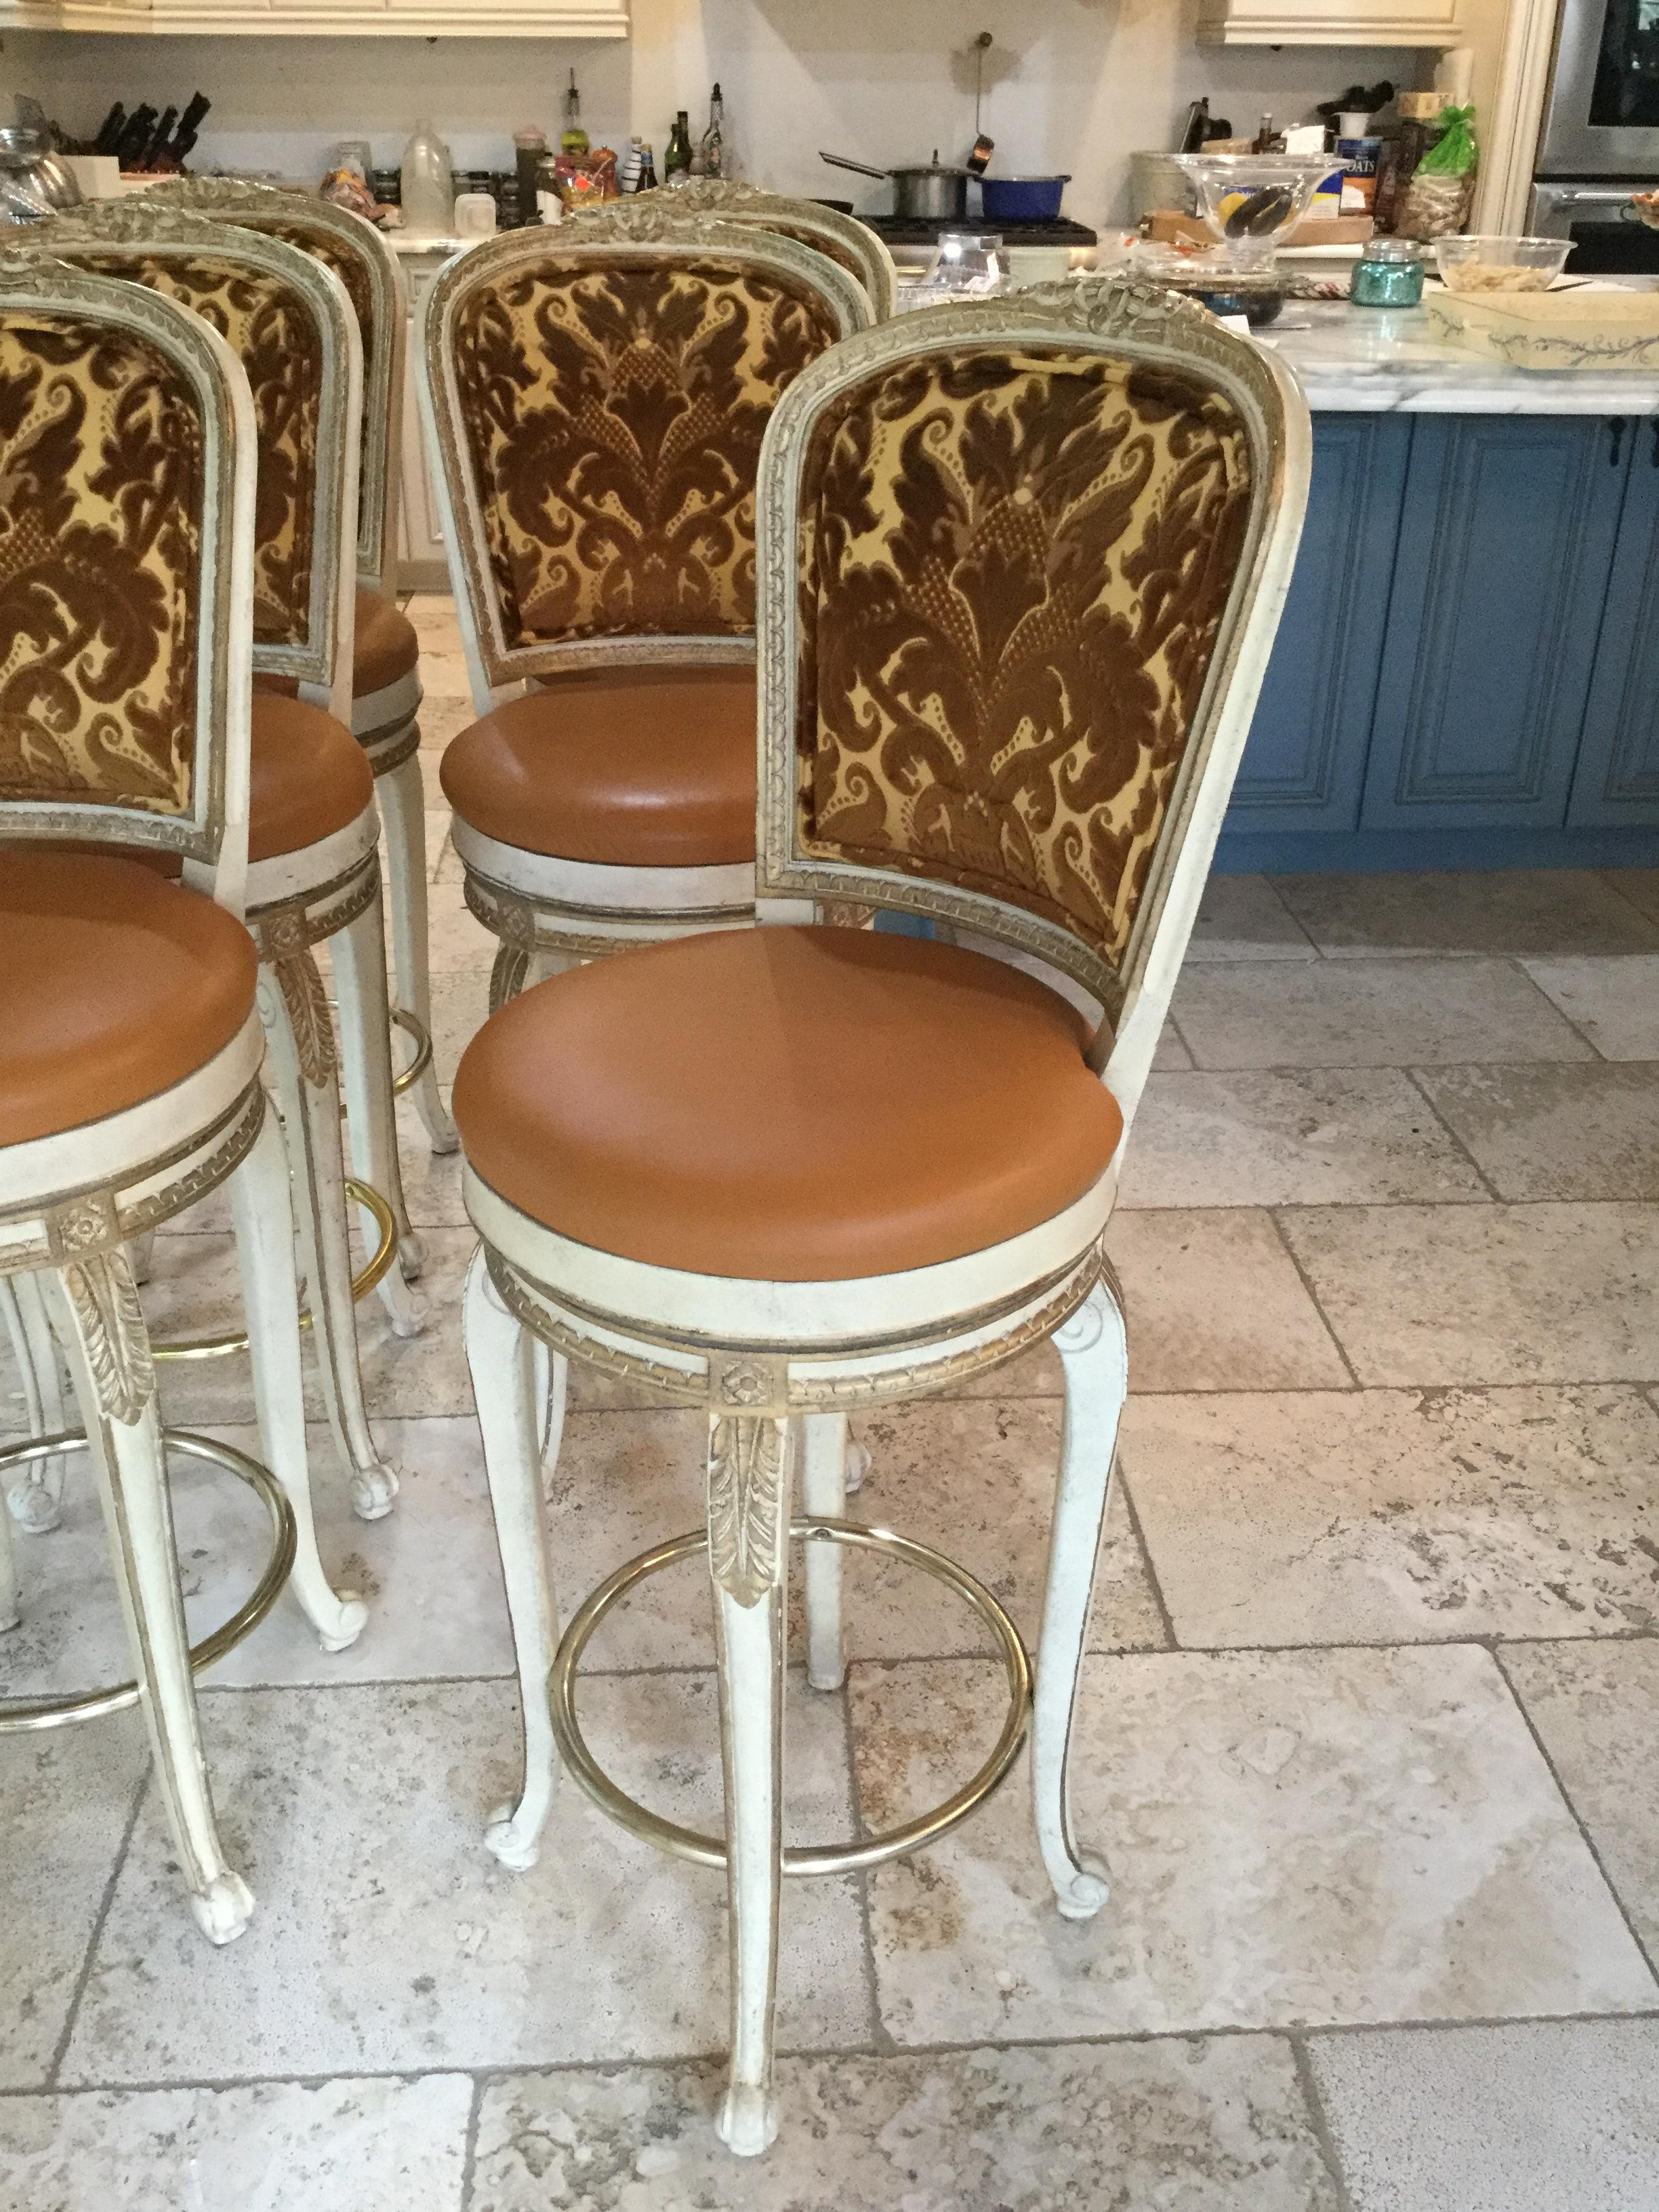 Elegant Louis XV style painted bar stools. This set of 6 swivel bar stools features a faux-leather seat and a rich velvet brocade upholstery. There are gold accents on the legs and a brass bar to place your feet for comfort. Very good condition.